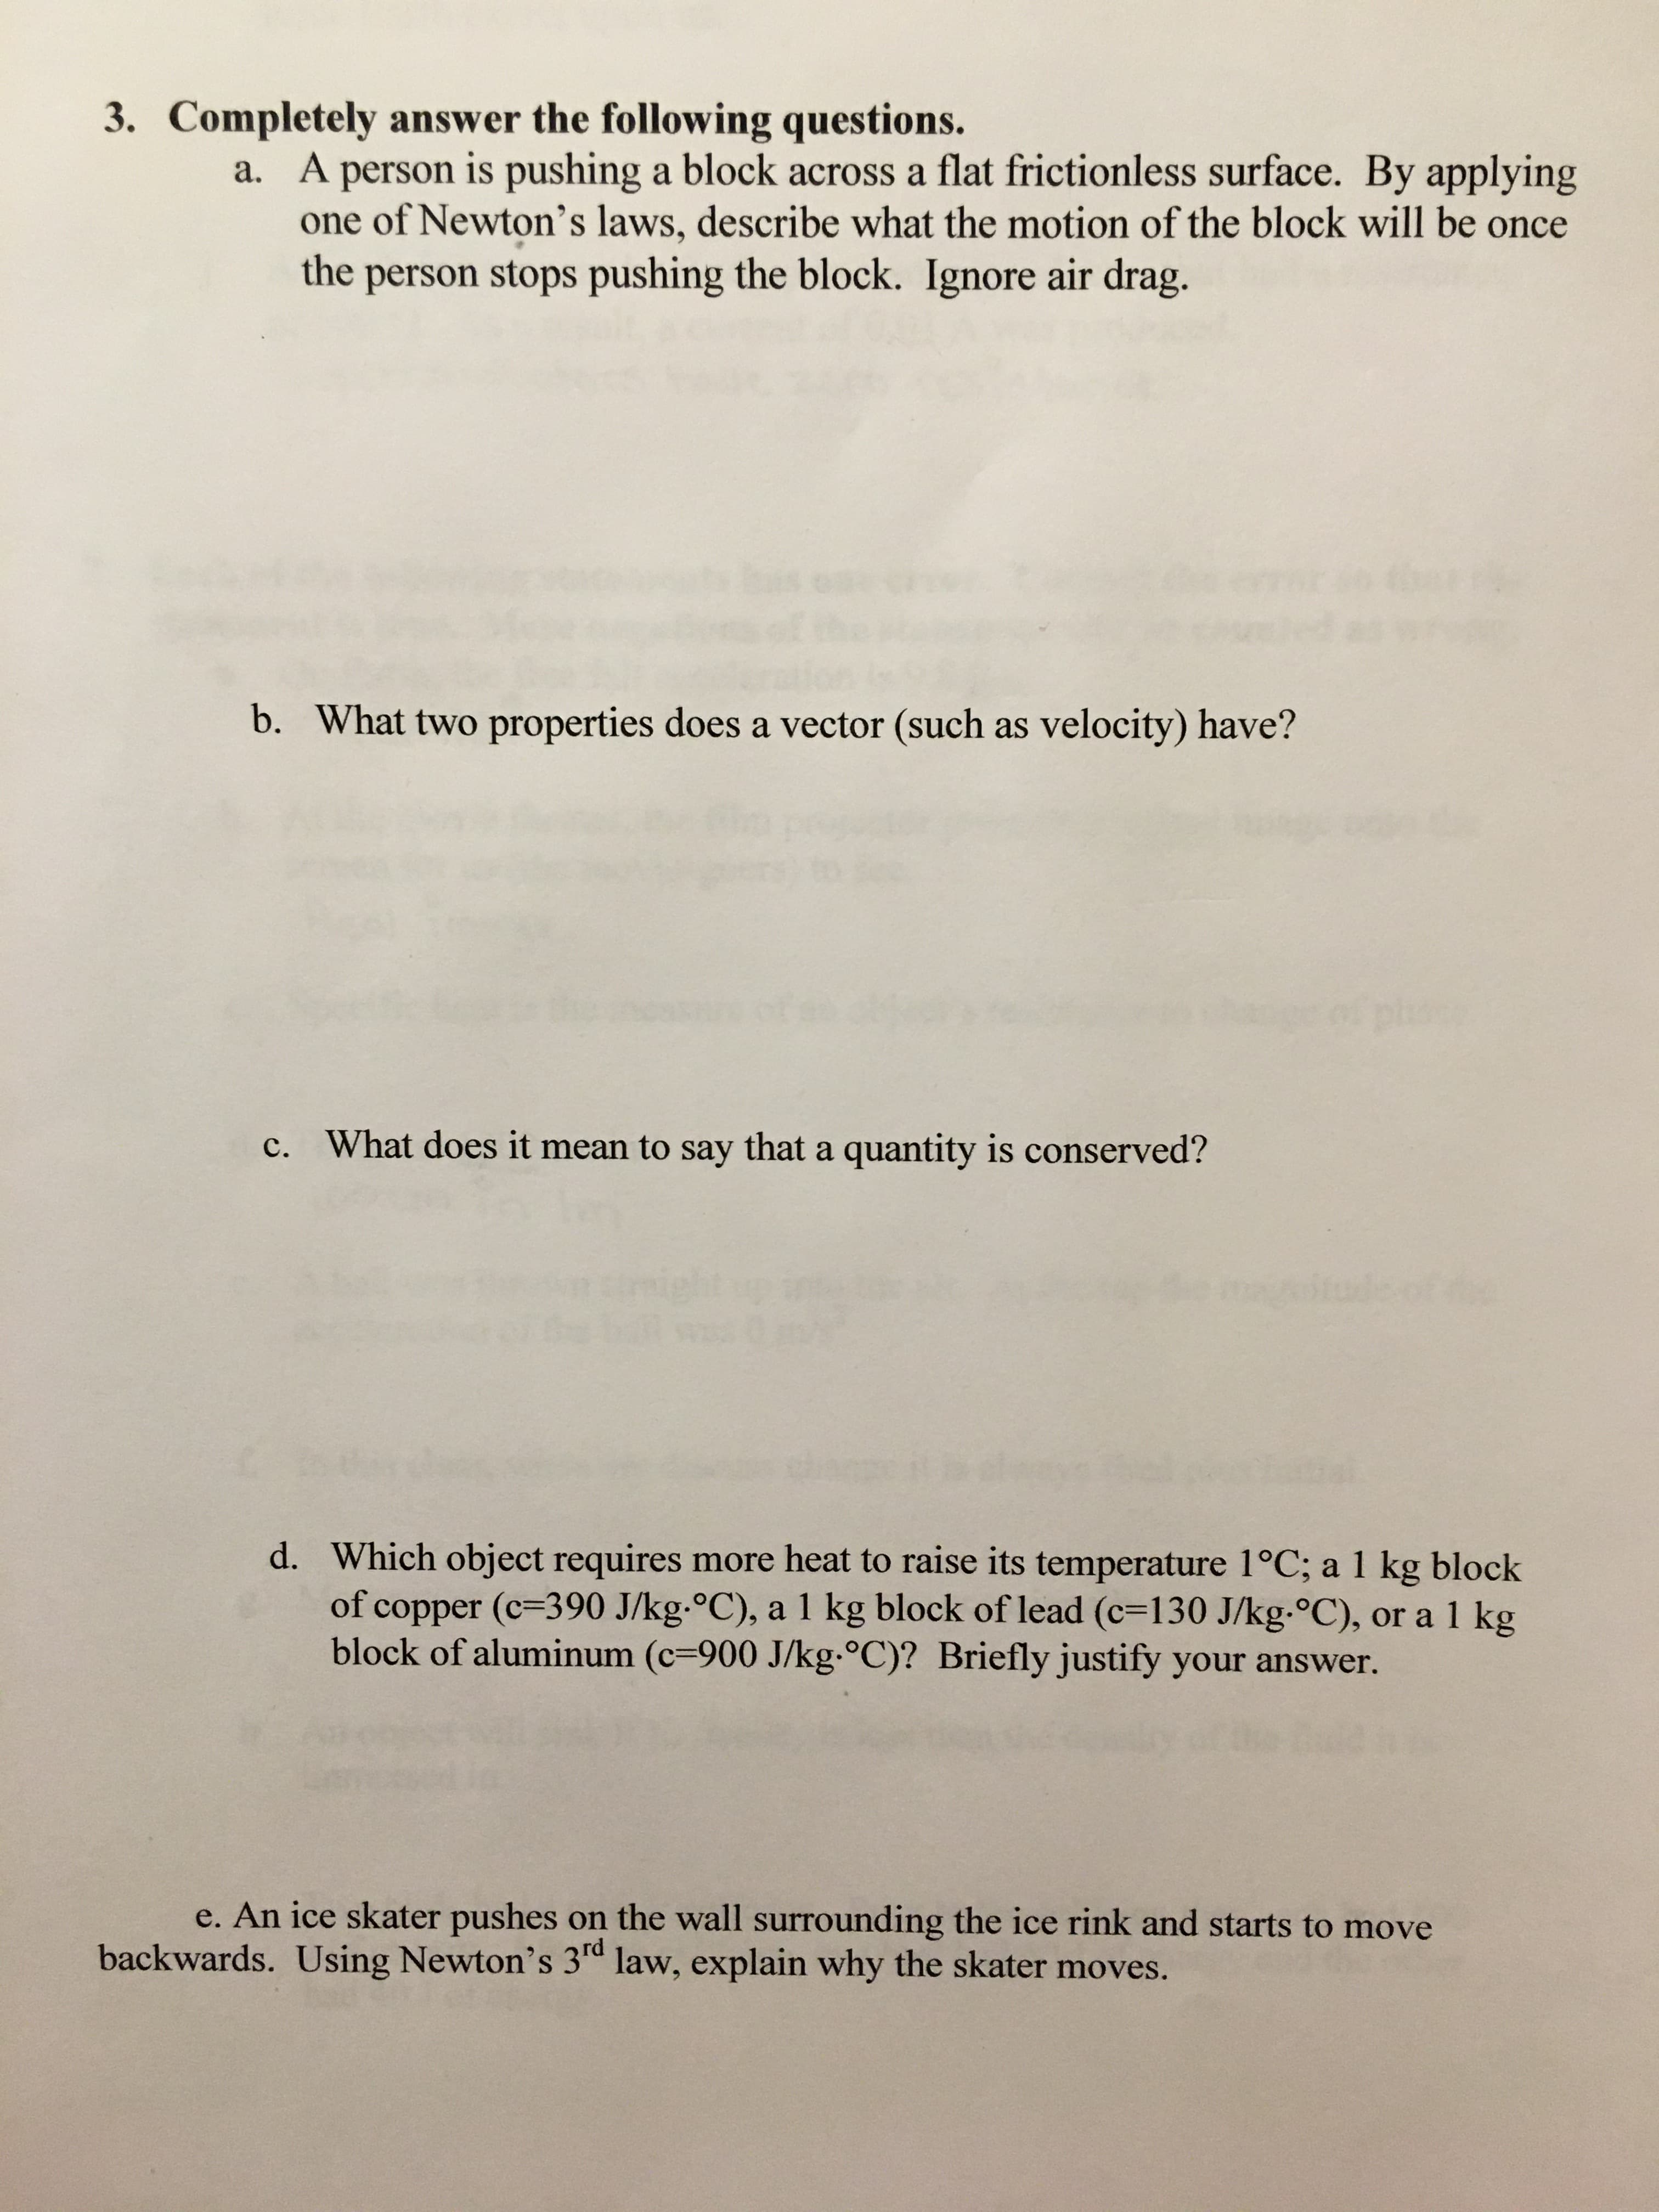 3. Completely answer the following questions.
a. A person is pushing a block across a flat frictionless surface. By applying
one of Newton's laws, describe what the motion of the block will be once
the person stops pushing the block. Ignore air drag.
b. What two properties does a vector (such as velocity) have?
c. What does it mean to say that a quantity is conserved?
Segtudeot
d. Which object requires more heat to raise its temperature 1°C; a 1 kg block
of copper (c=390 J/kg-°C), a 1 kg block of lead (c=130 J/kg-°C), or a 1 kg
block of aluminum (c=900 J/kg.°C)? Briefly justify your answer.
e. An ice skater pushes on the wall surrounding the ice rink and starts to move
backwards. Using Newton's 3rd law, explain why the skater moves.
